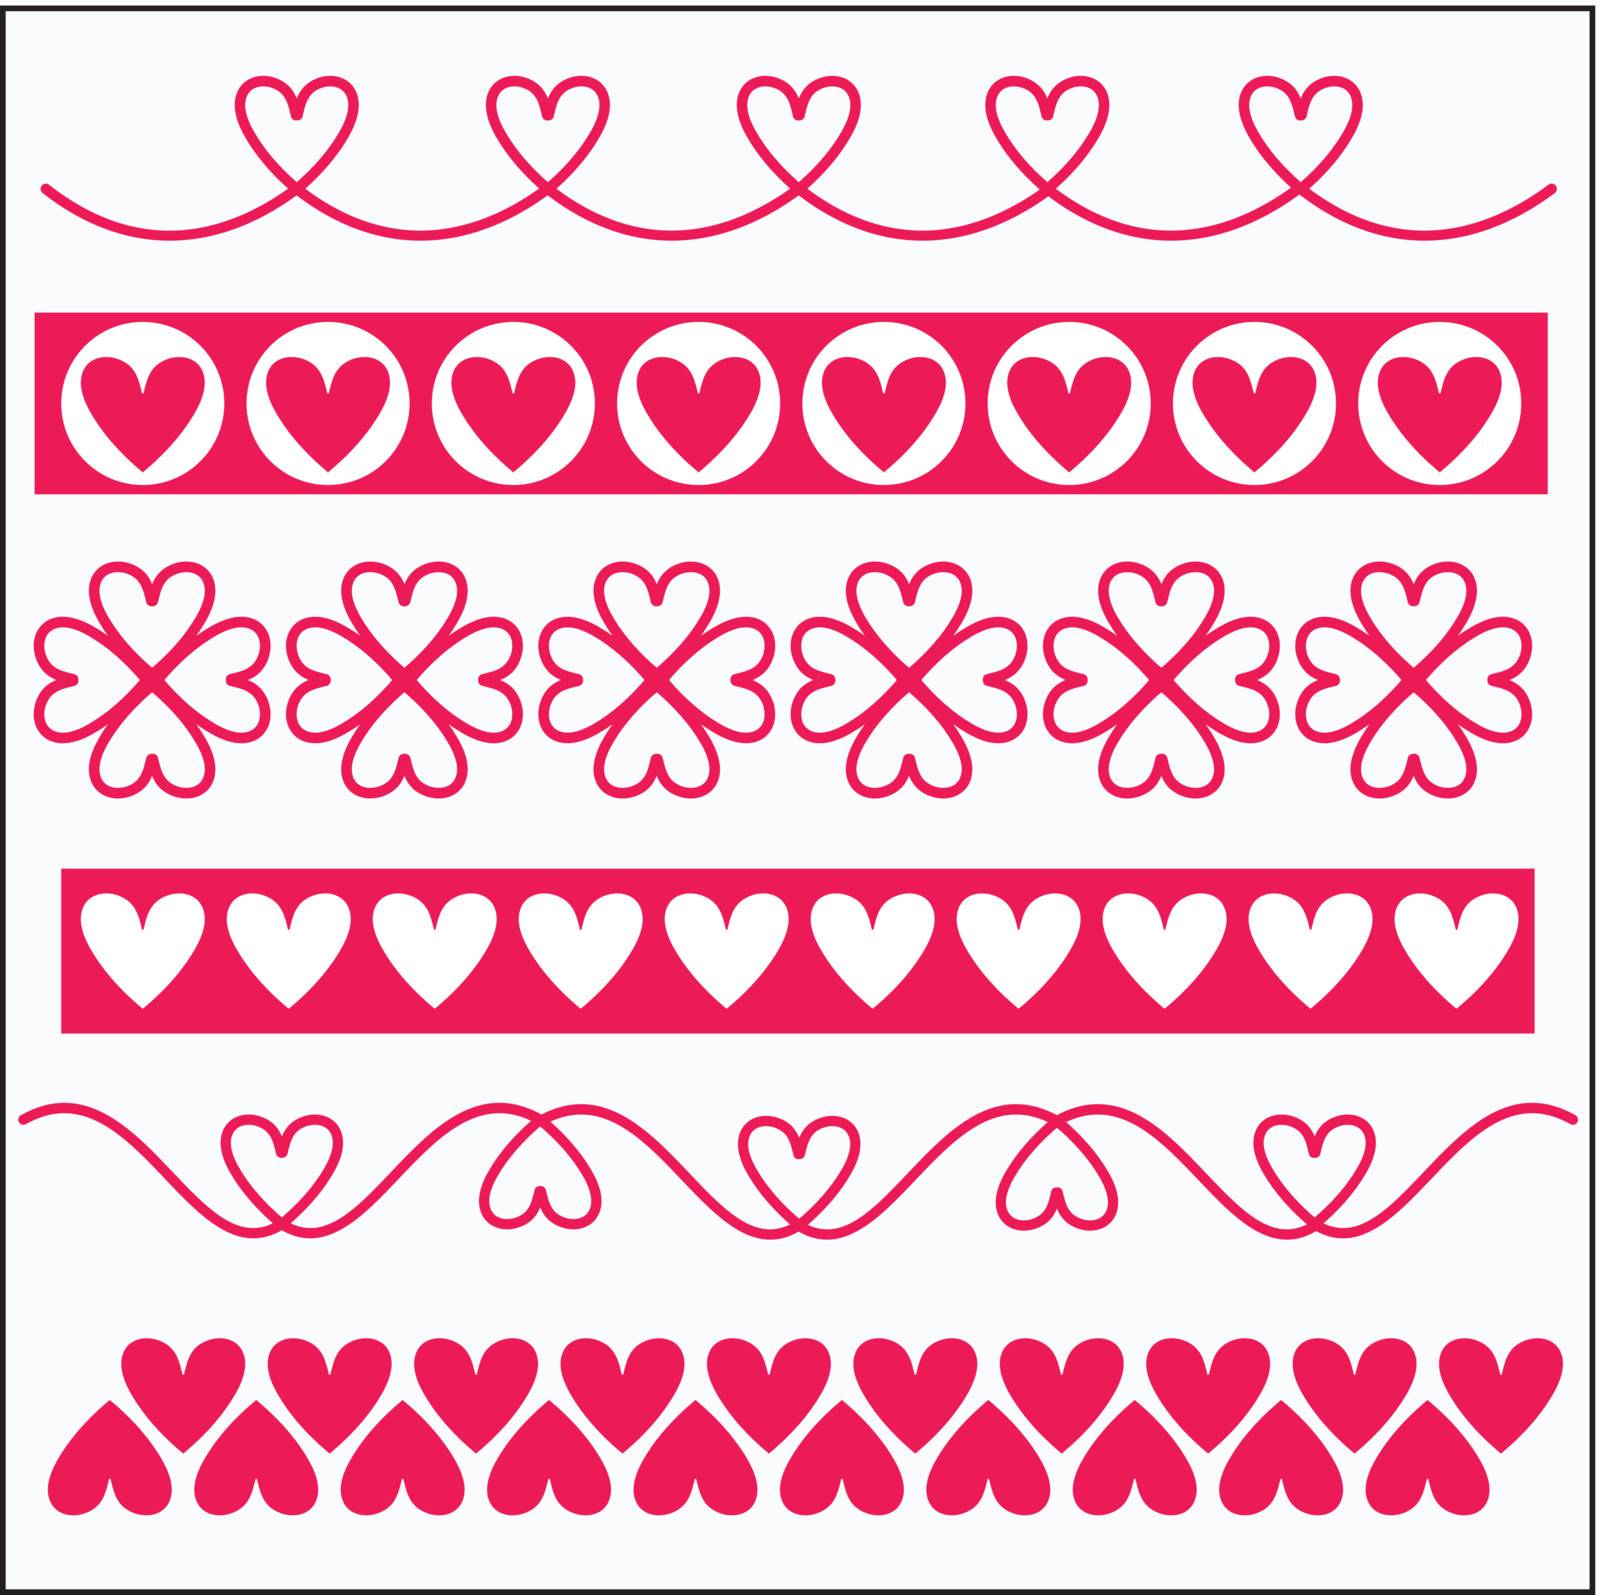 six red and white ornaments with hearts